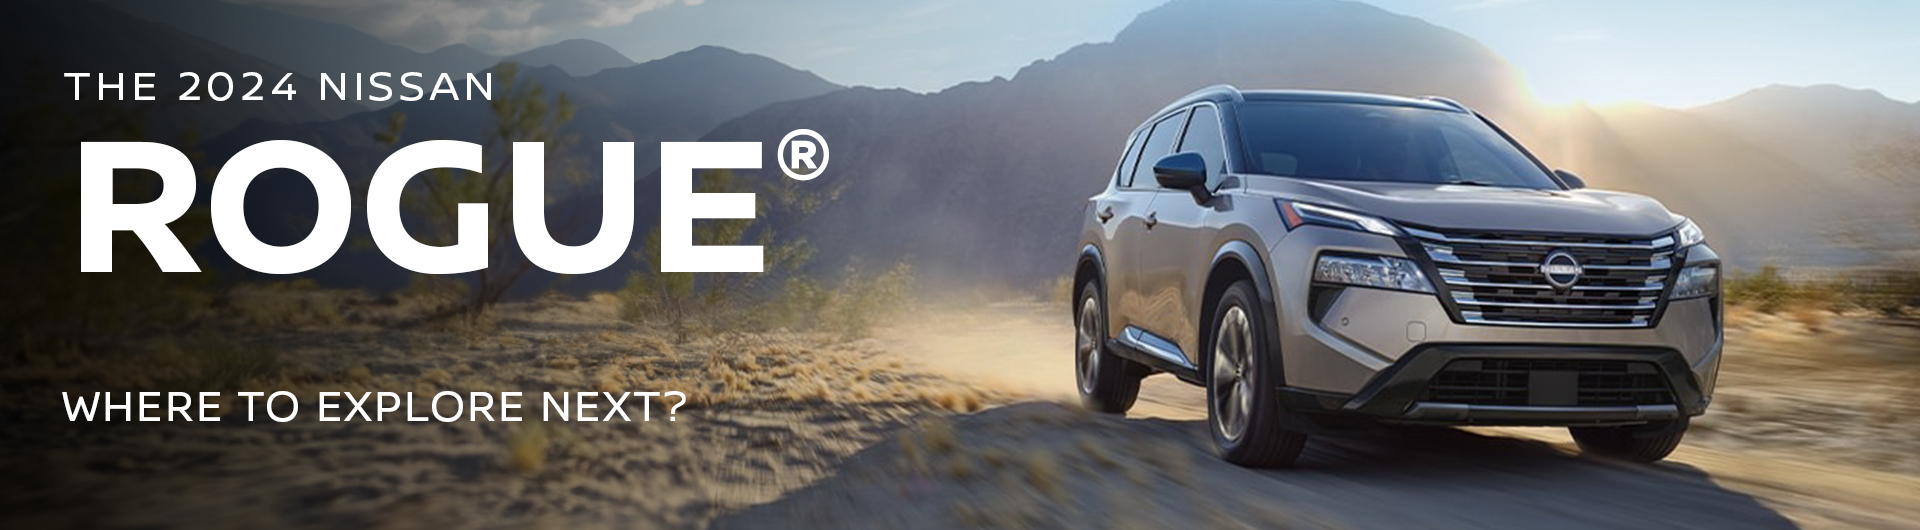 A New Nissan Rogue® Available at Younger Nissan of Frederick in Frederick, MD